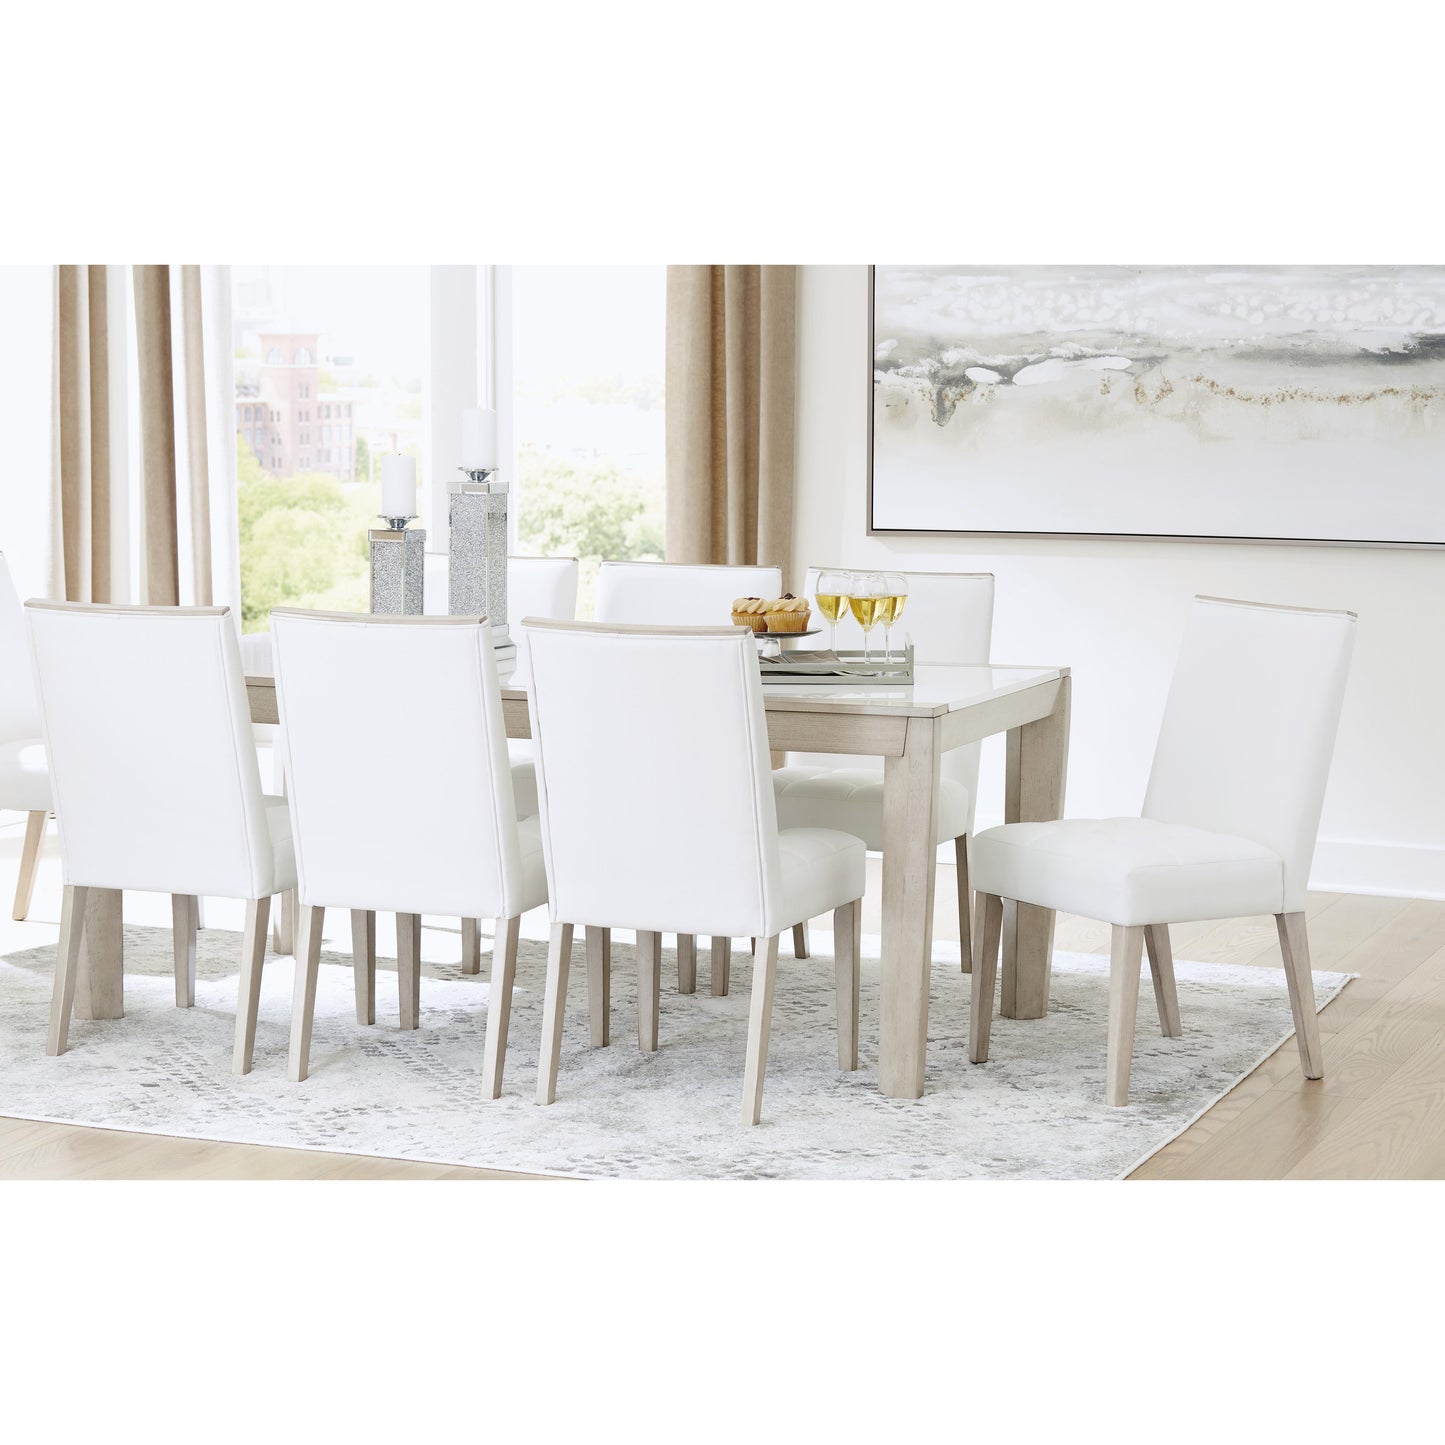 Signature Design by Ashley Wendora Dining Chair D950-01